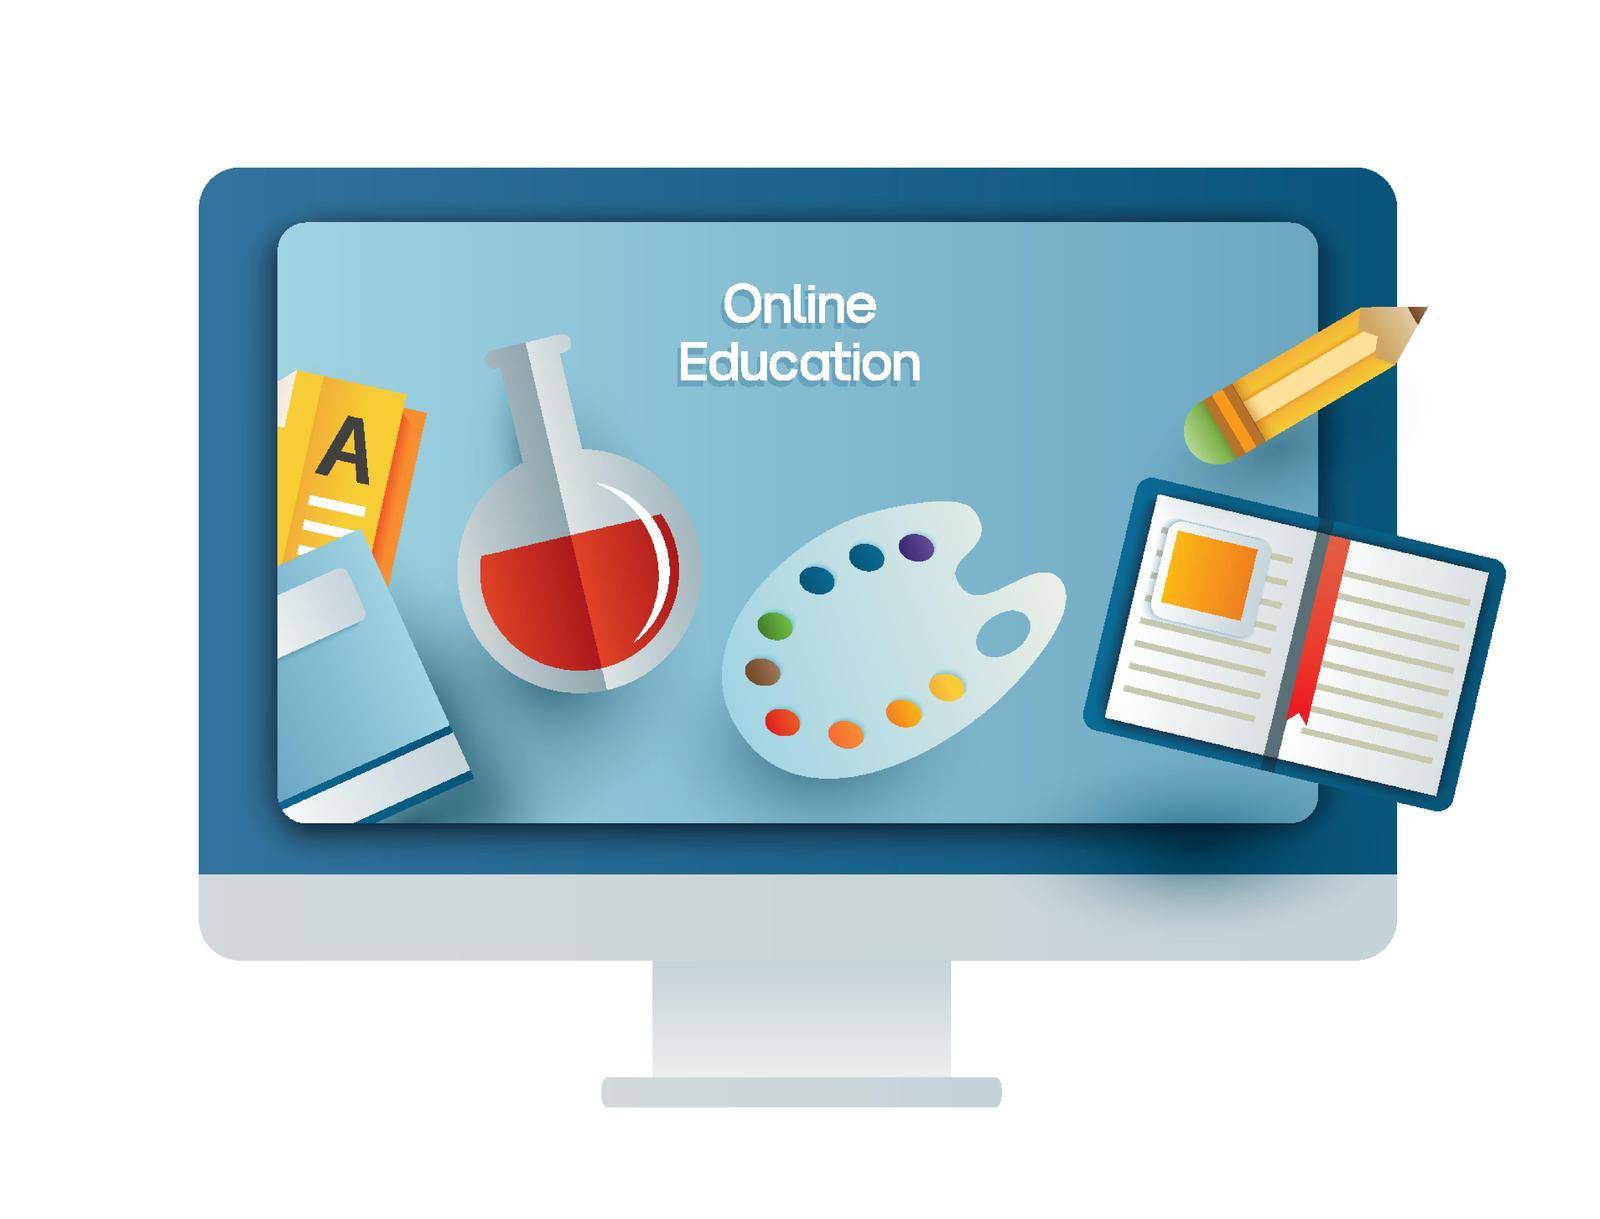 Online education learning on computer. Learning at home with social distancing concept. by kaisorn